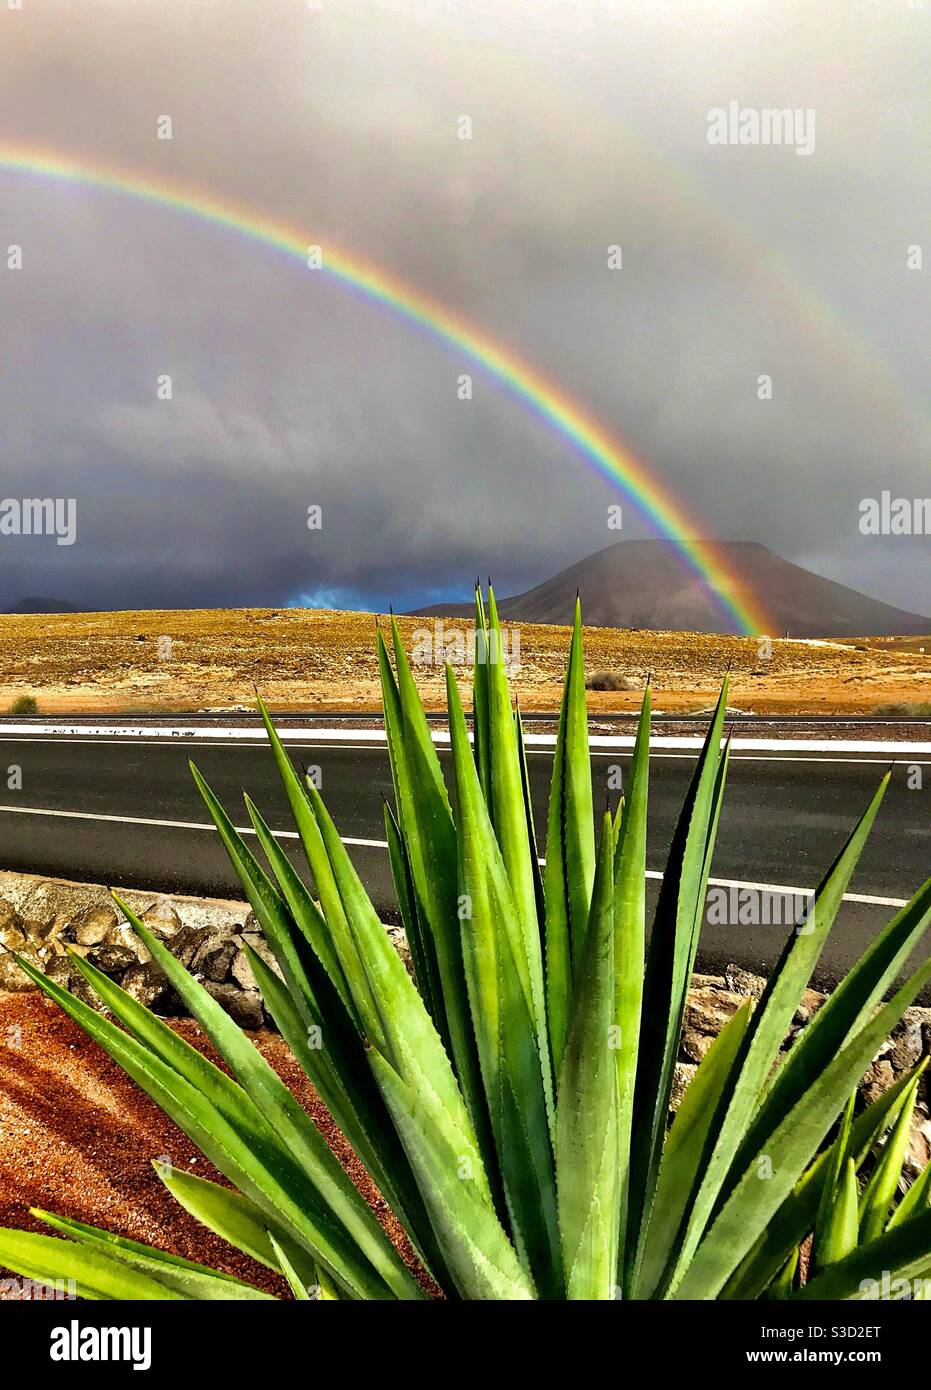 View from behind Aloe Vera plant of Rainbow over beach, Parque Hollandes, Coast Road, Fuerteventura, Canary Islands with the island of Los Lobos in the background Stock Photo